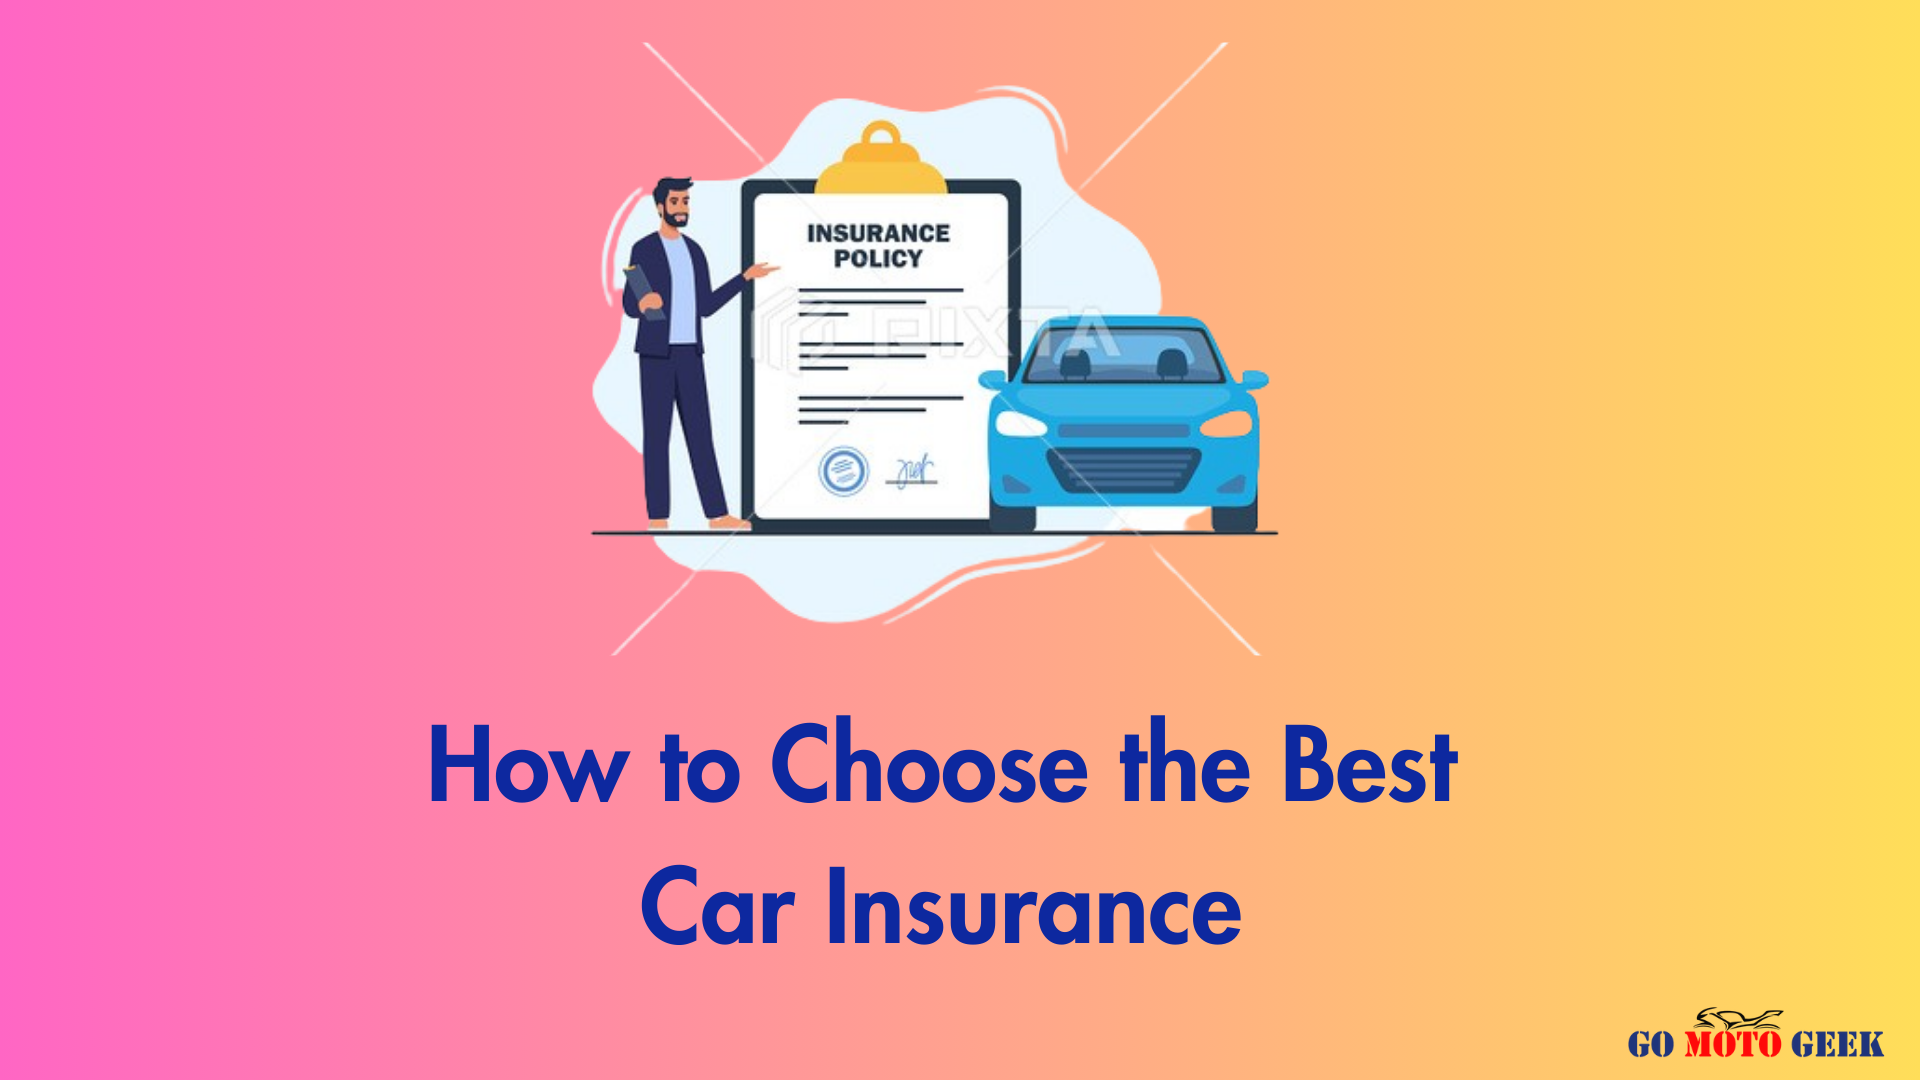 How to Choose the Best Car Insurance